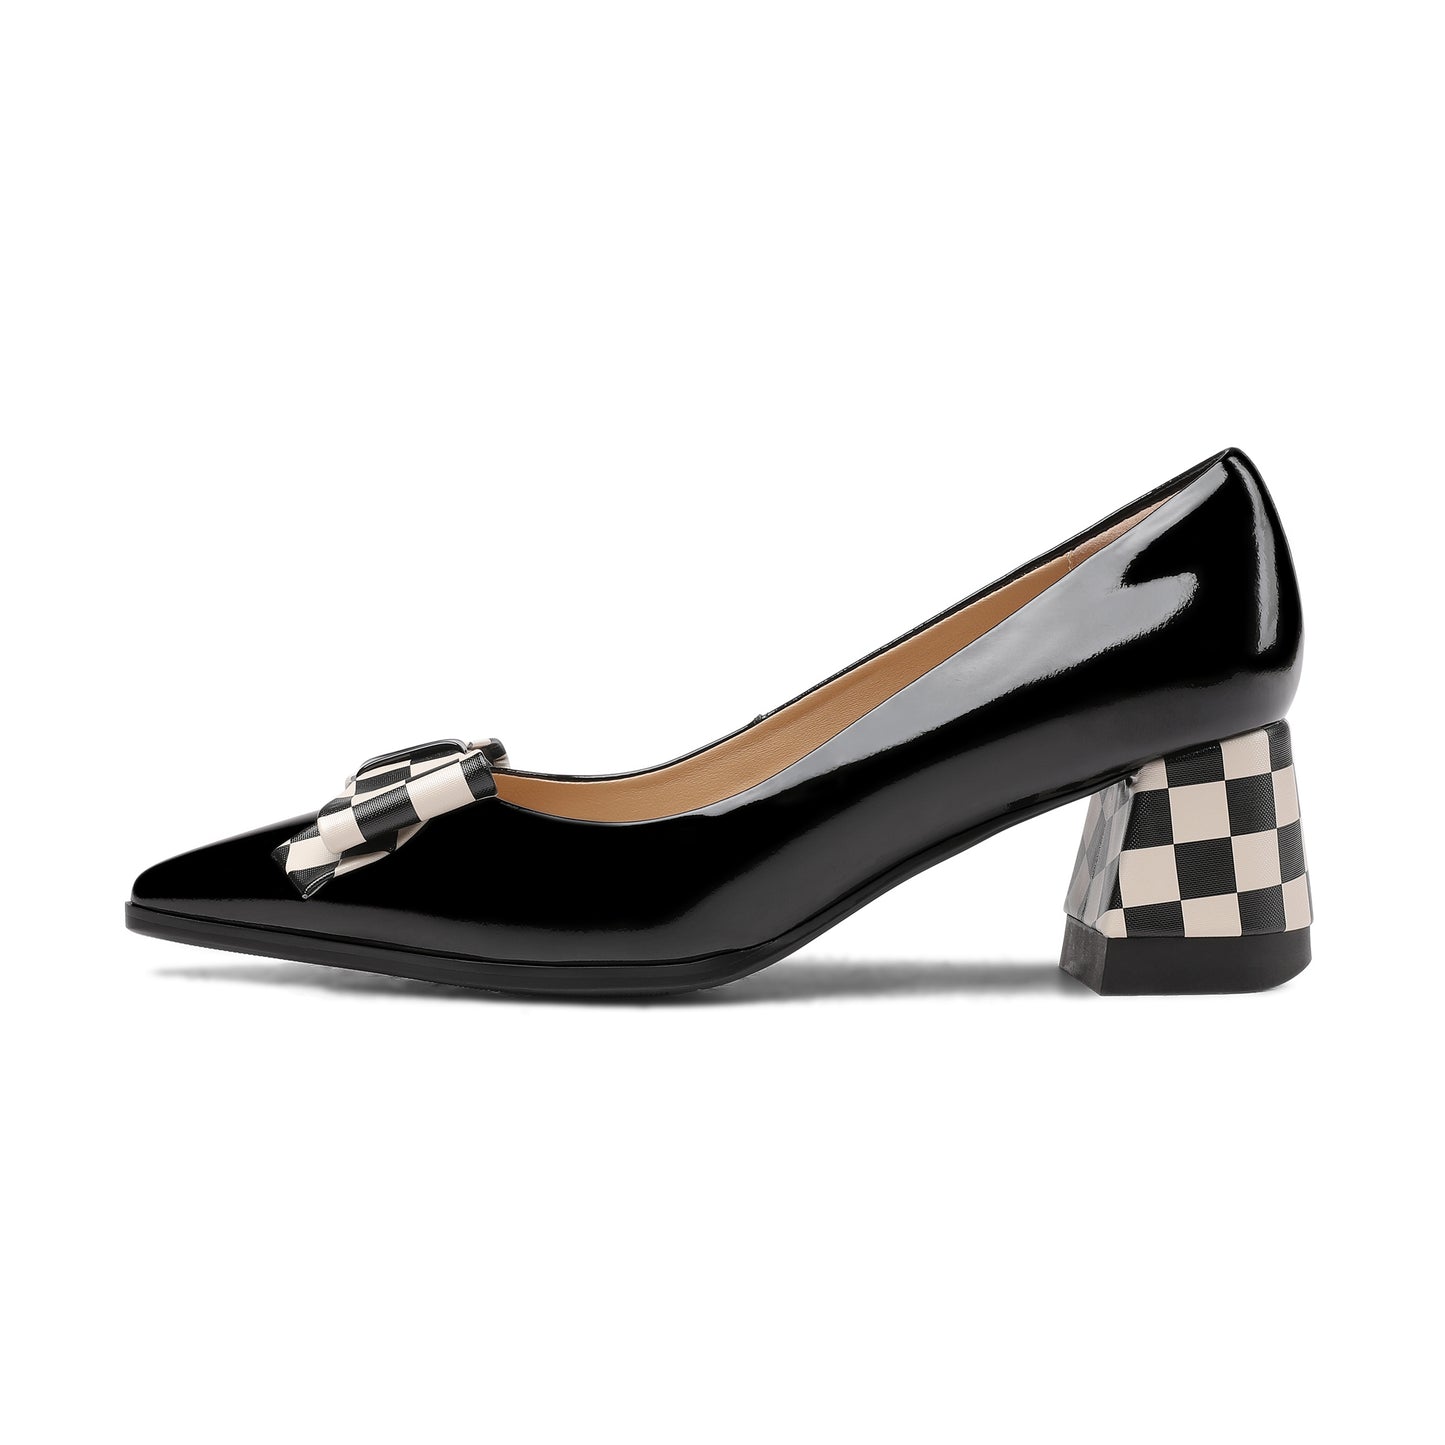 TinaCus Handmade Glossy Patent Leather Women's Chunky Heel Slip On Checkered Dress Pumps Shoes